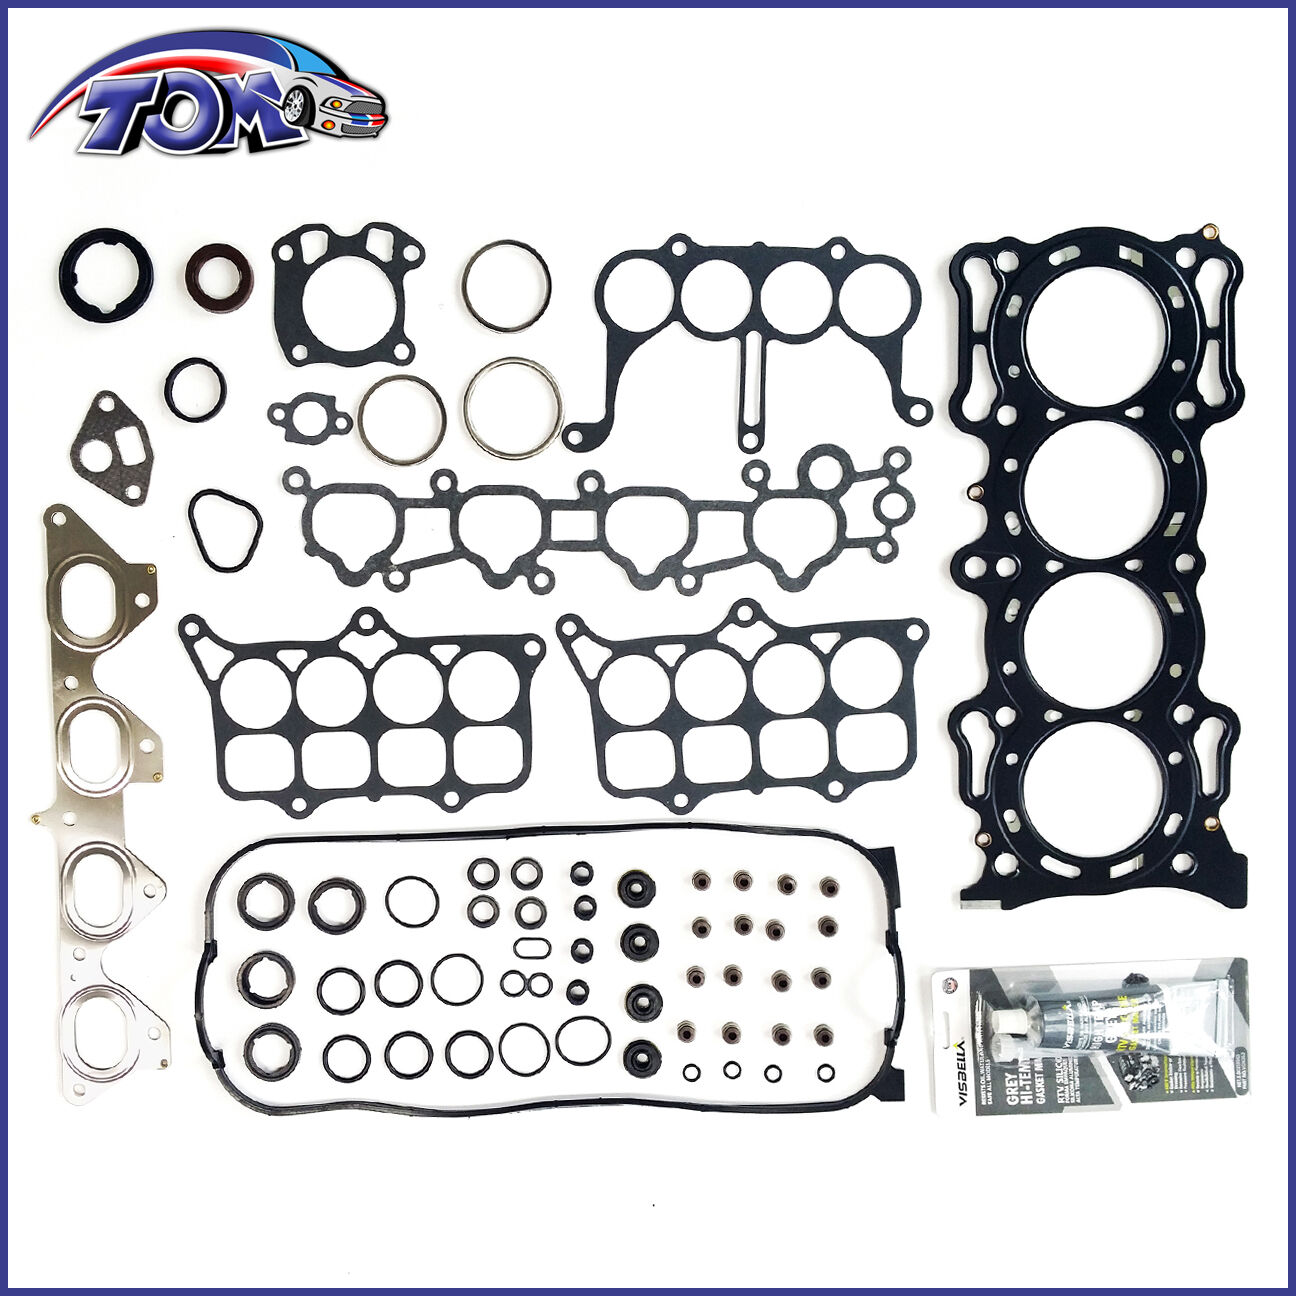 Brand New Head Gasket Set Kit For Honda 94-96 Prelude S & 90-93 Accord 2.2L